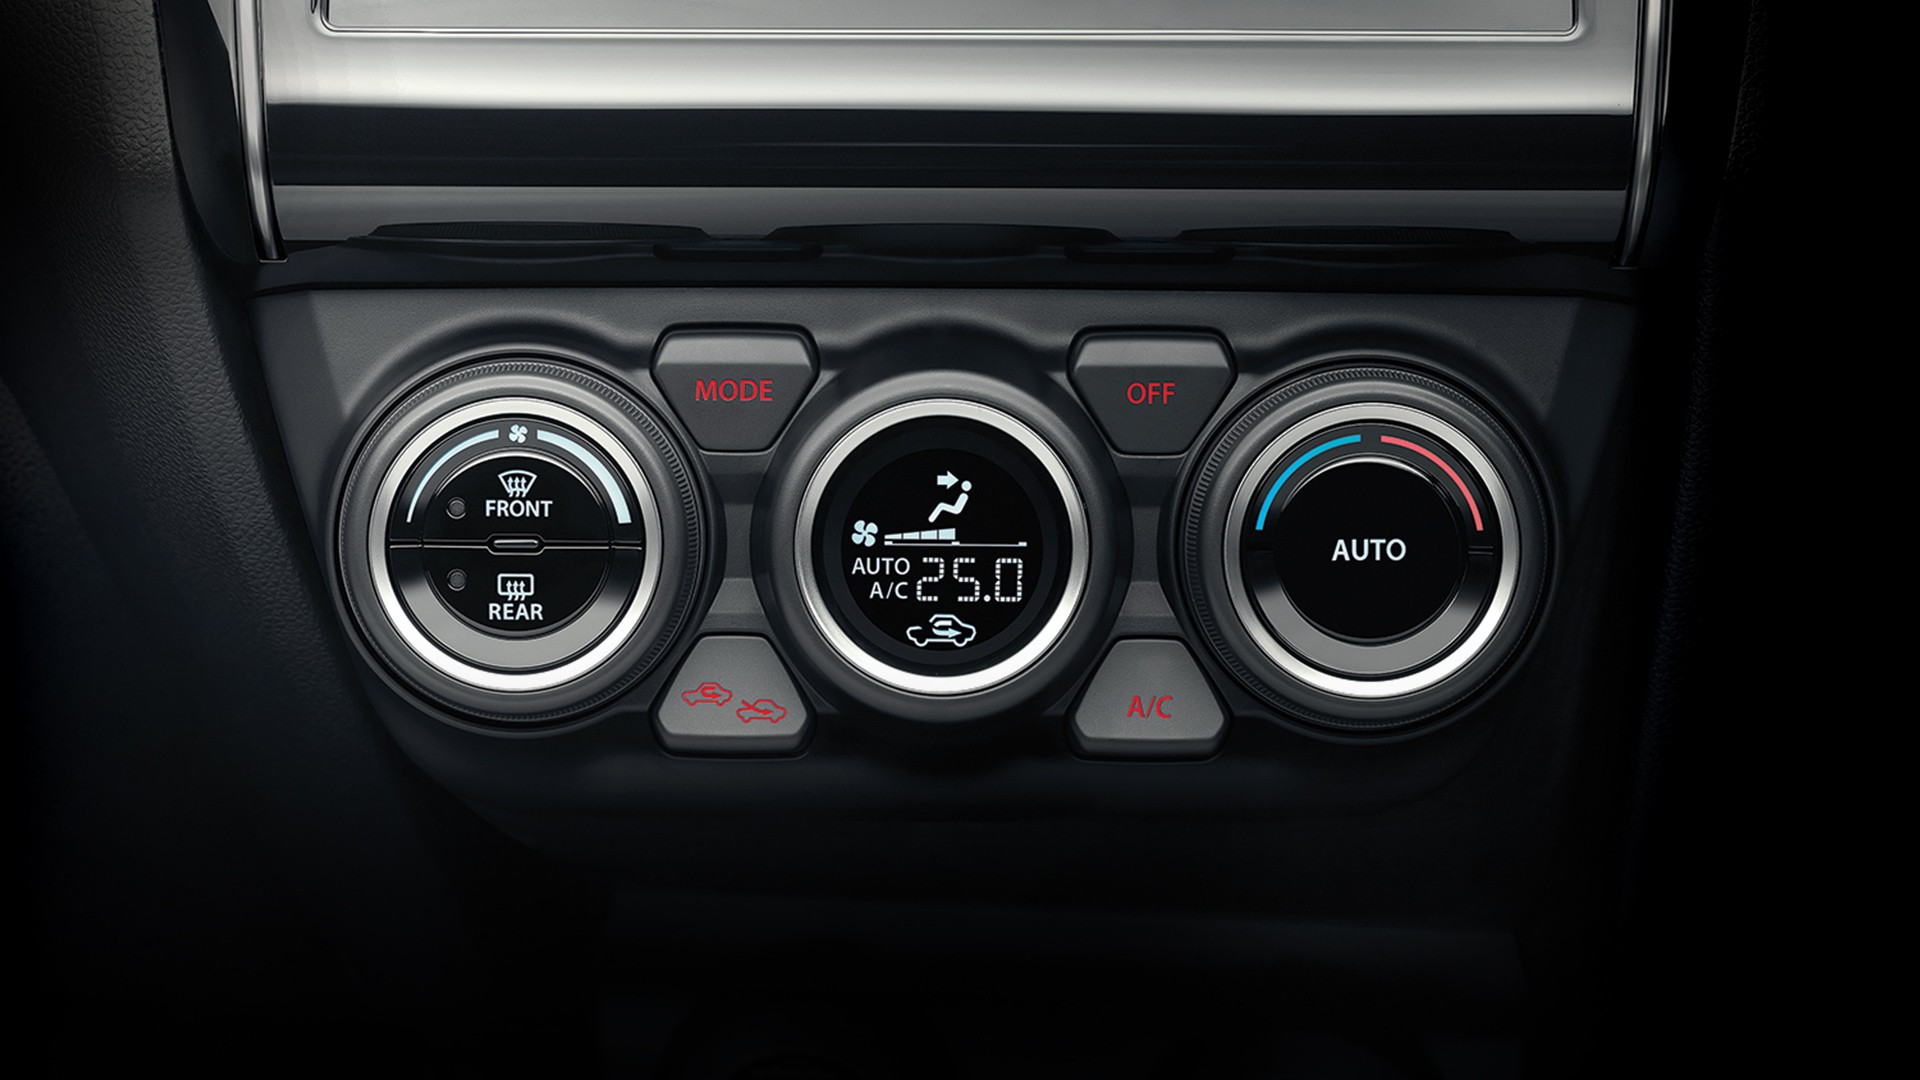 New Suzuki Swift Automatic Air Conditioner with An LCD Display.